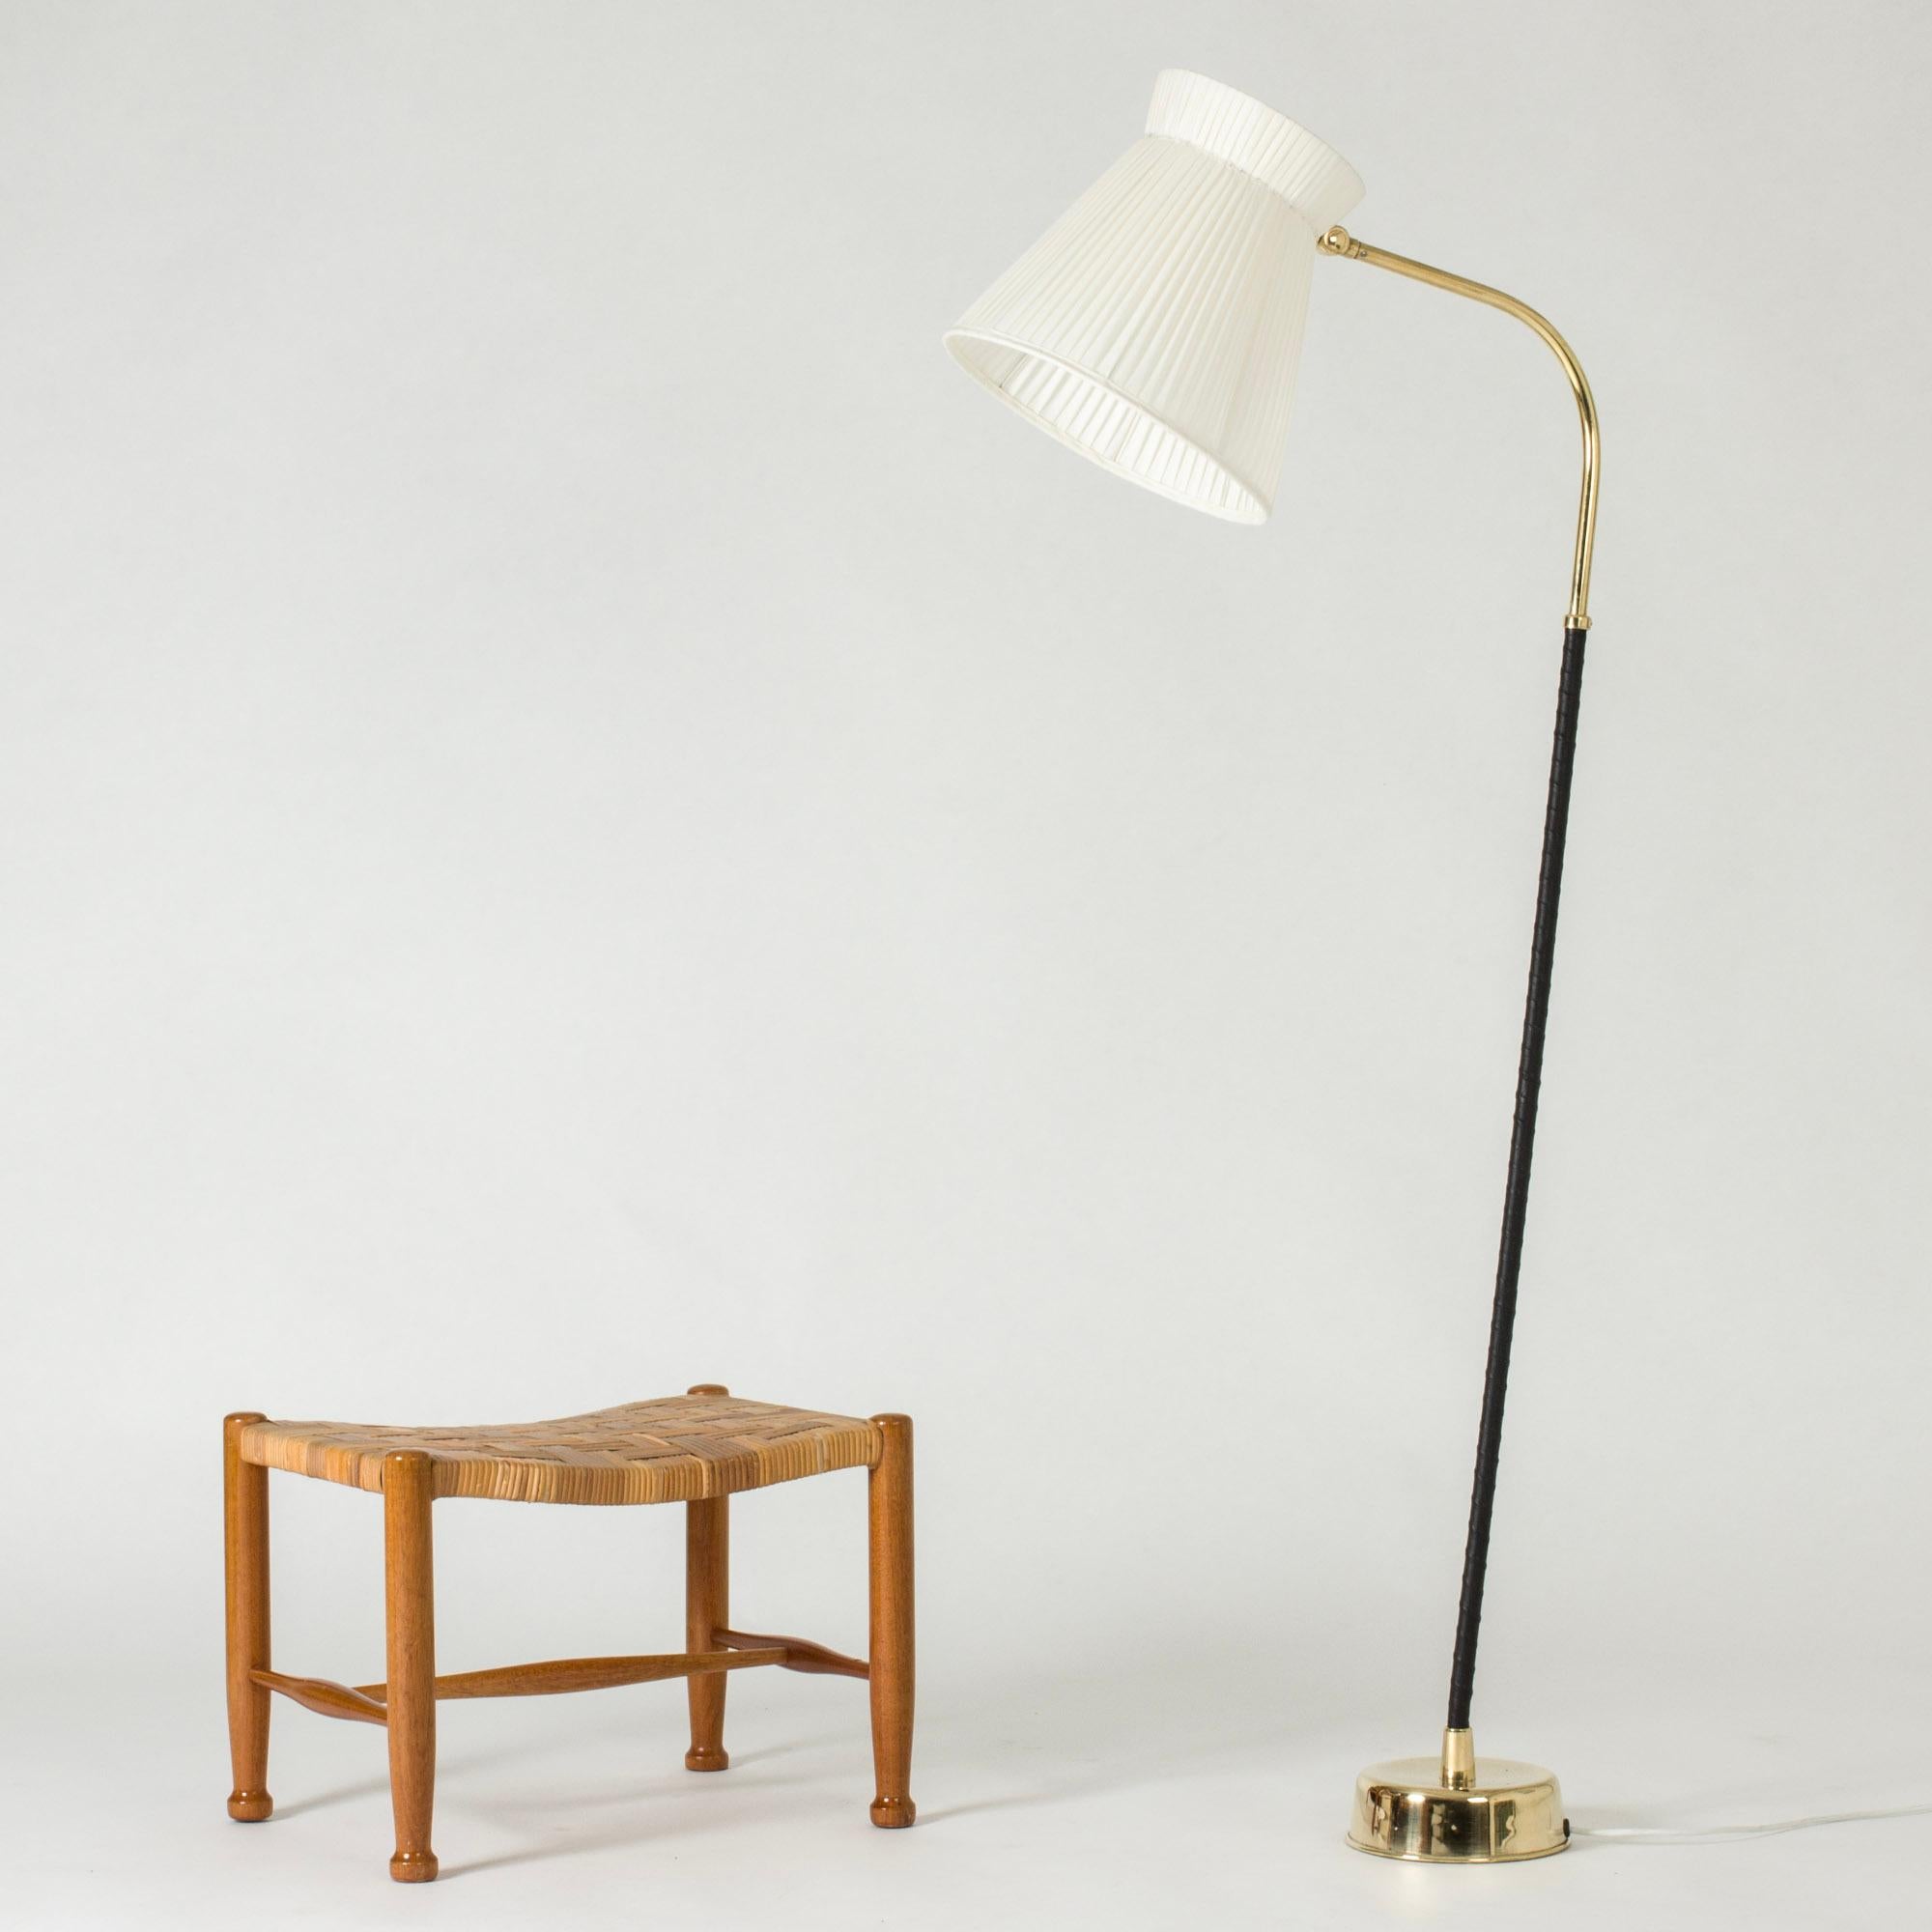 Midcentury Modern Floor Lamp by Lisa Johansson-Pape for Orno, Finland For Sale 1